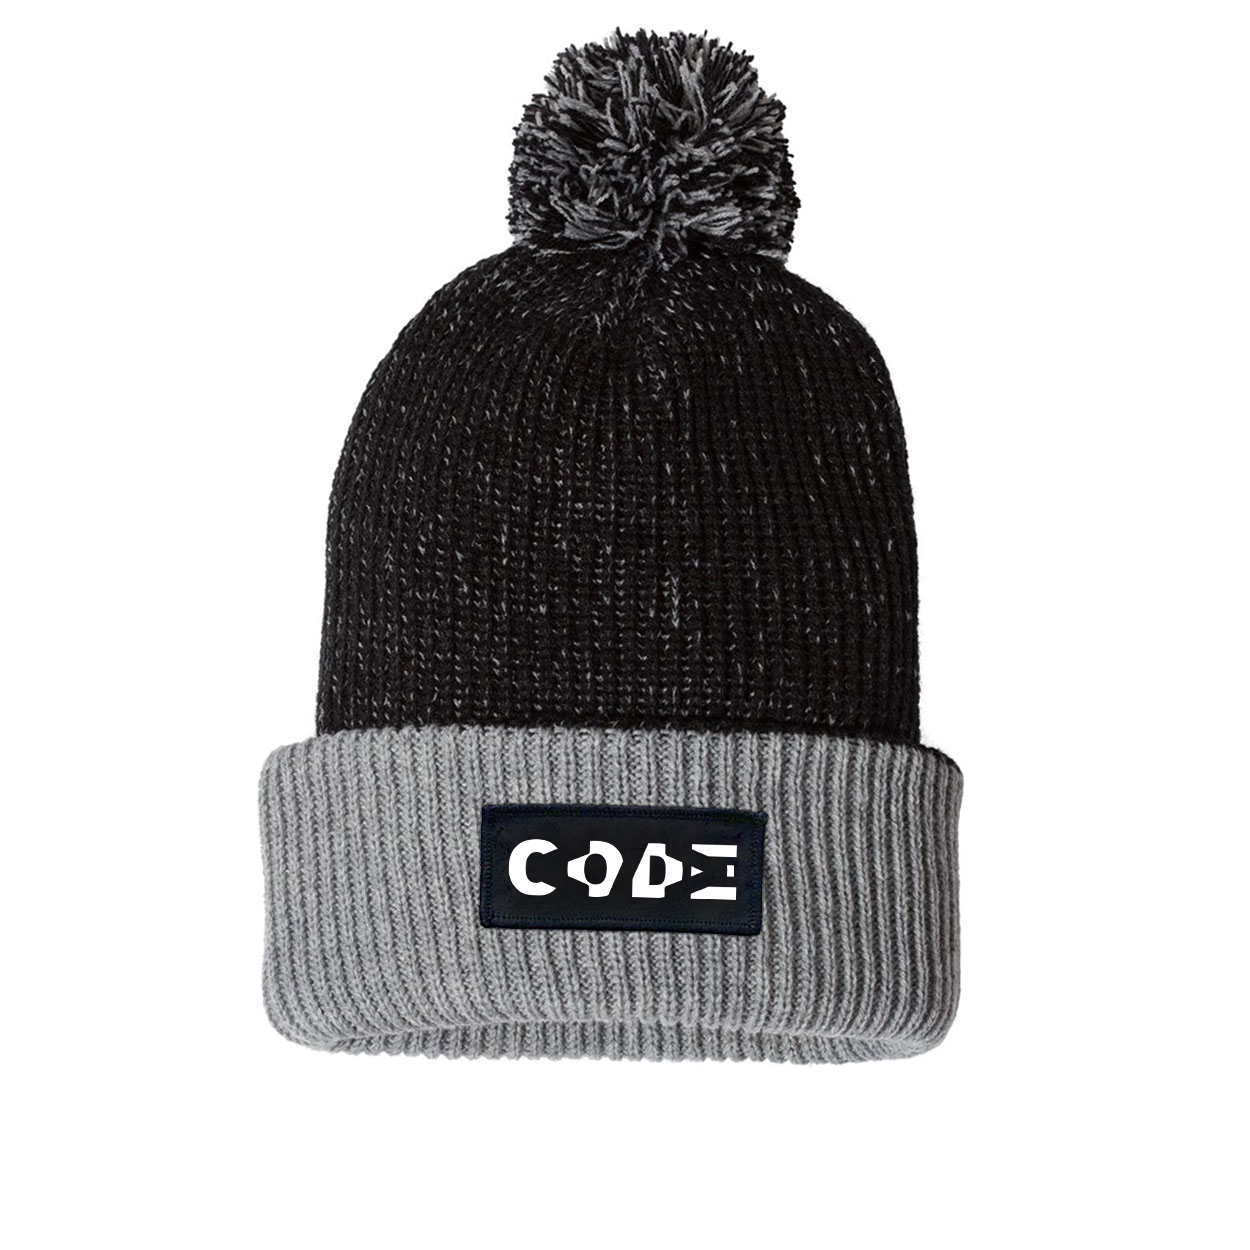 Code Tag Logo Night Out Woven Patch Roll Up Pom Knit Beanie Black/Gray (White Logo)